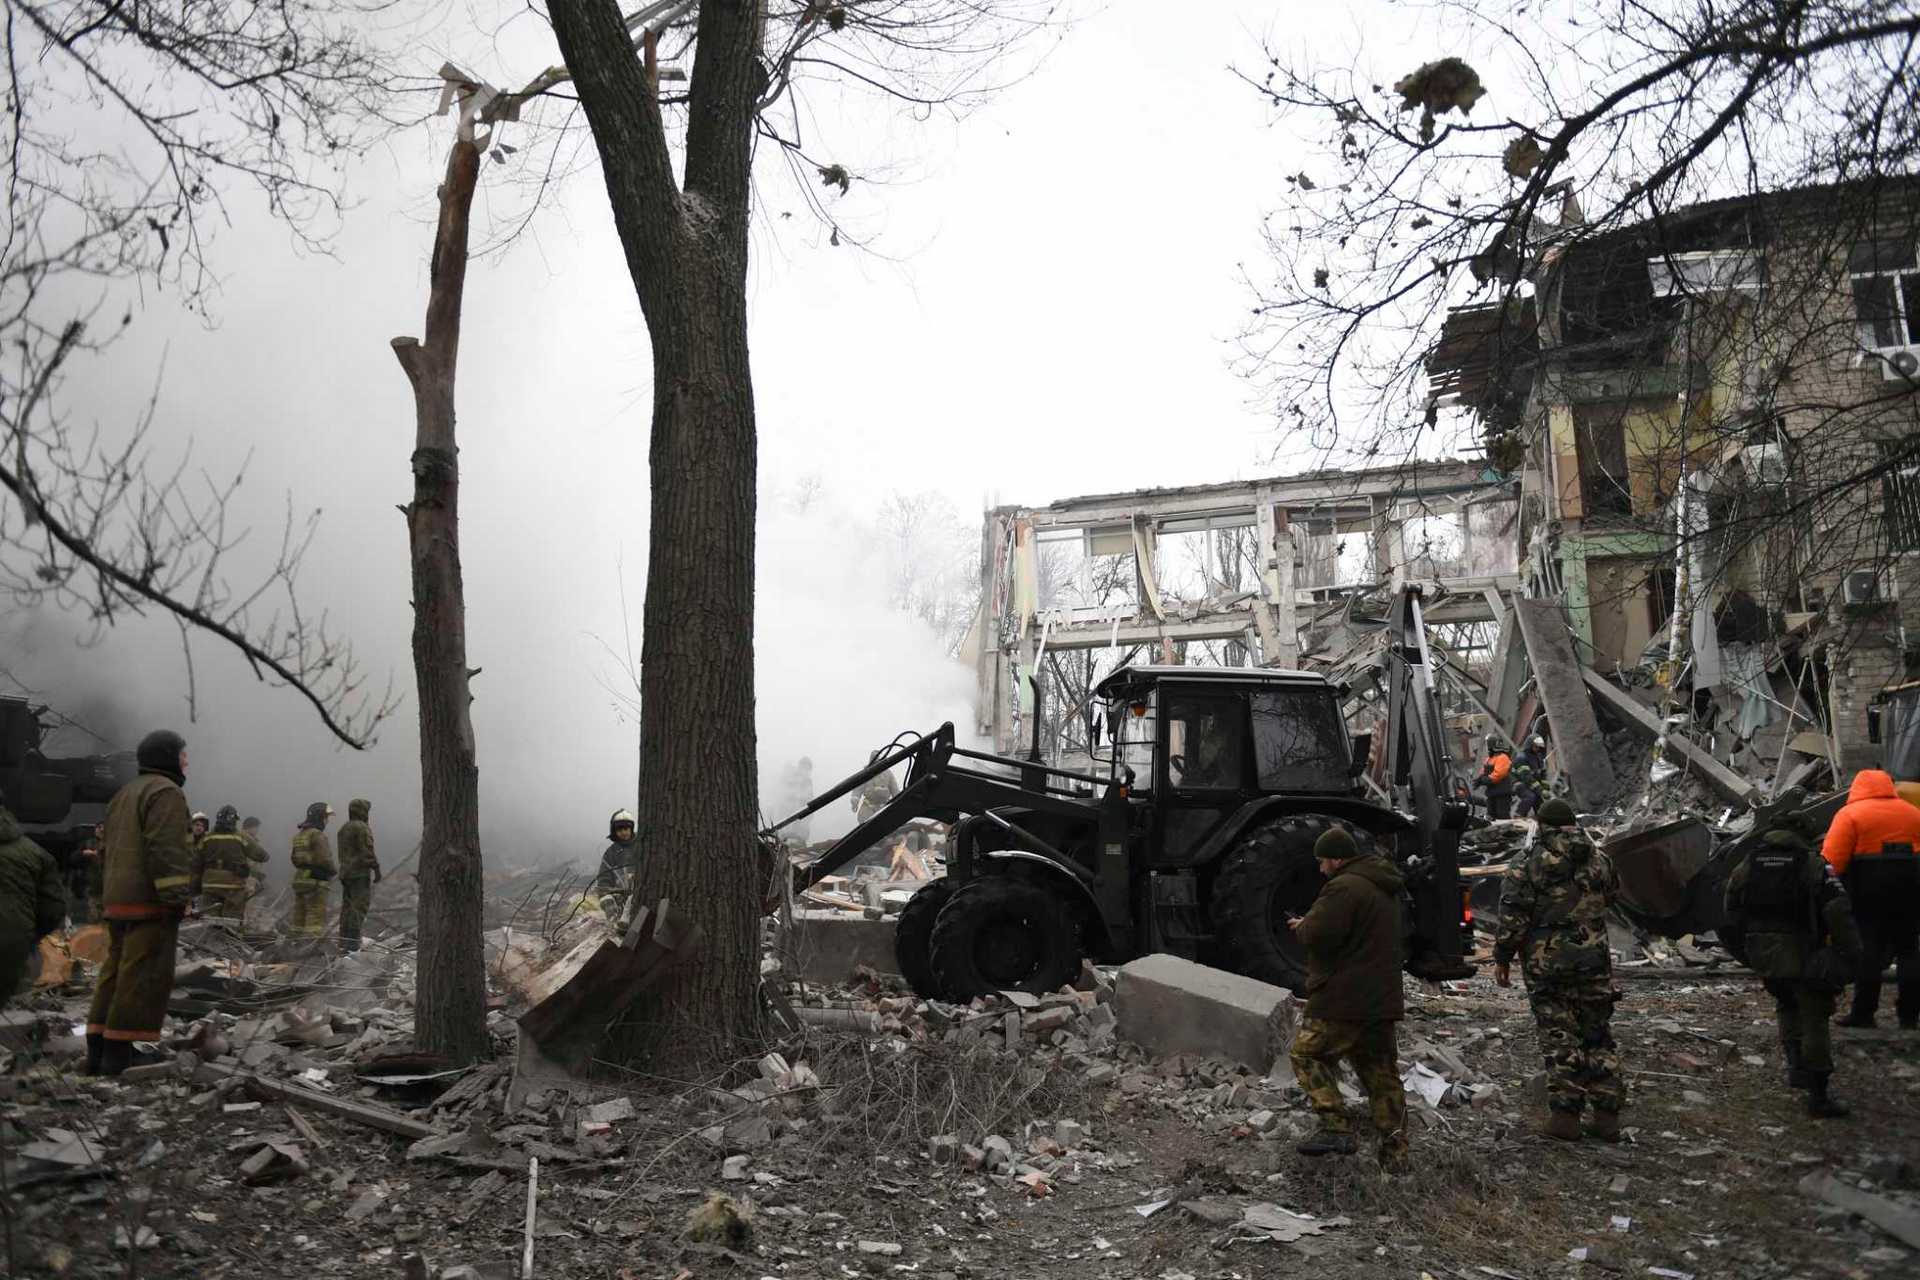 Donetsk's emergency employees work at a site of a destroyed shopping center in Donetsk